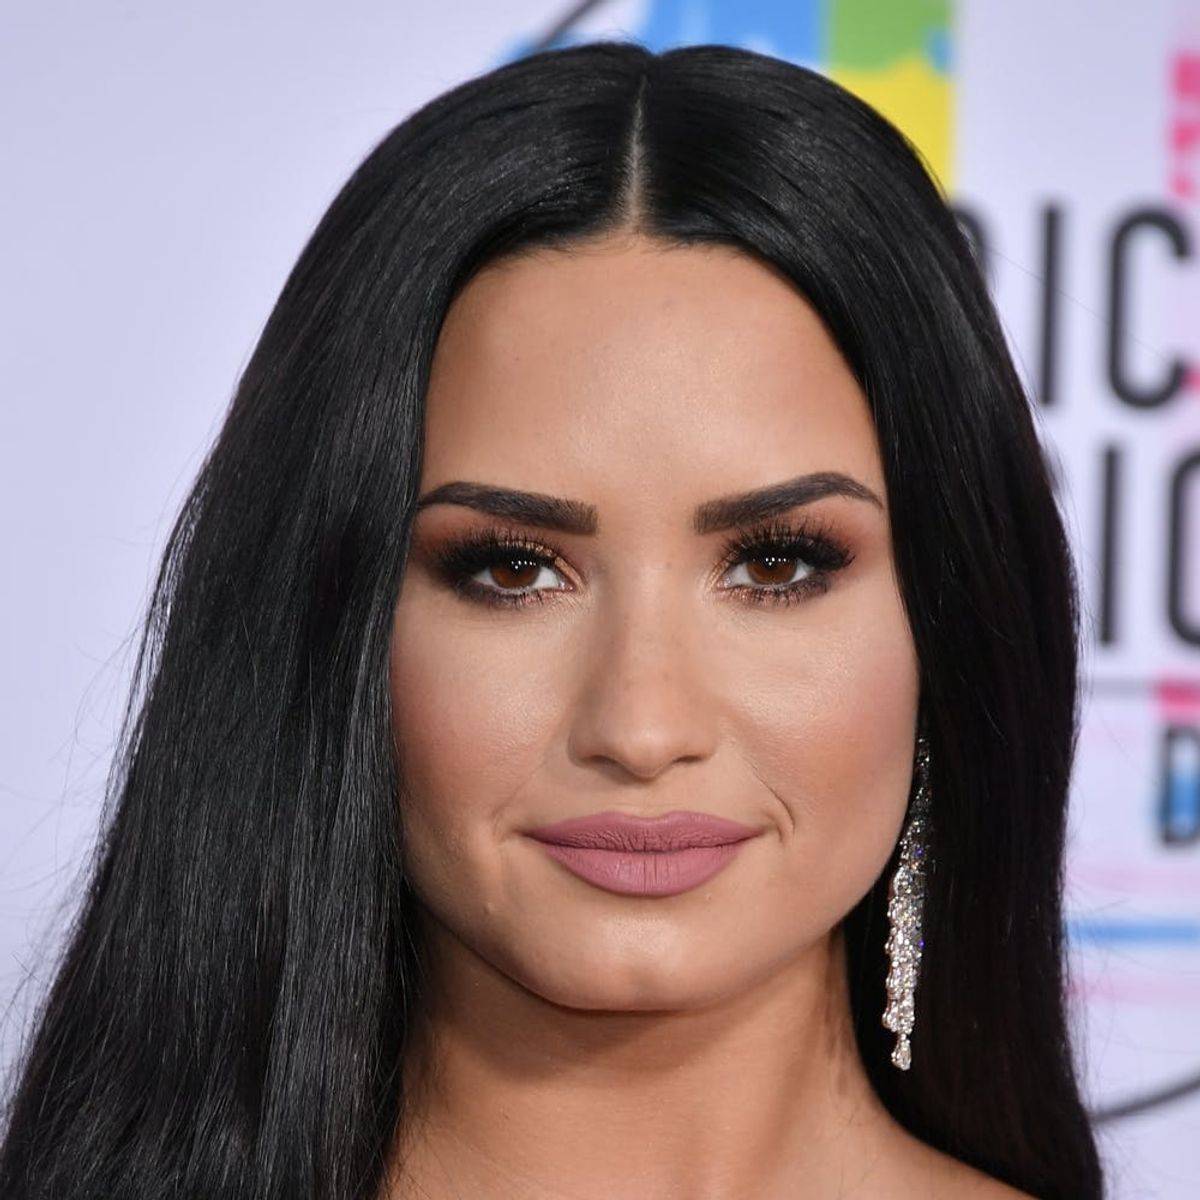 See Demi Lovato Looking Positively Angelic in a Mystery Wedding Dress